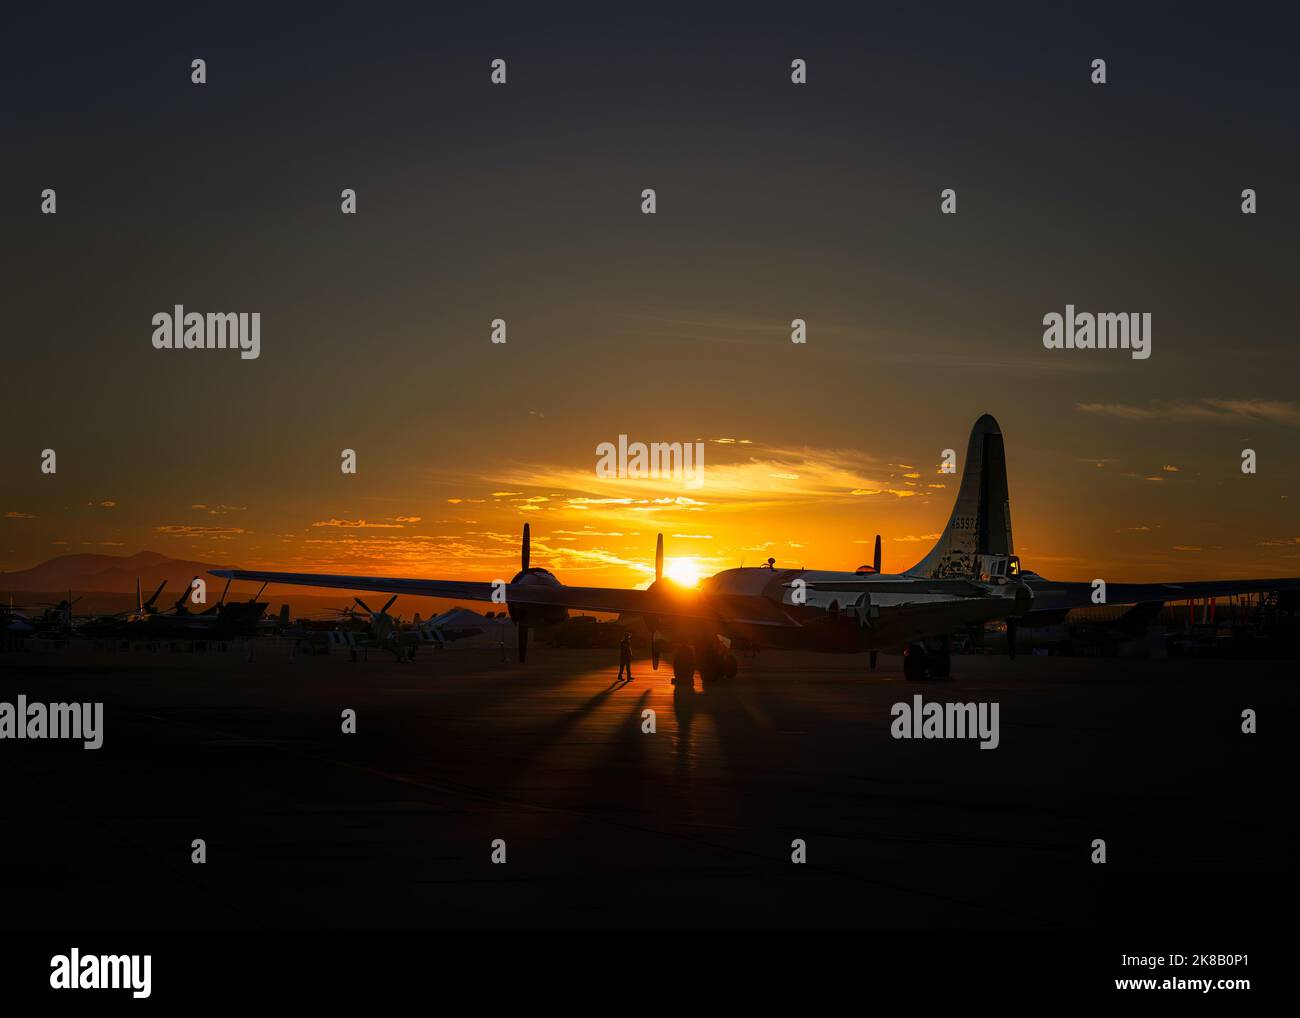 The sun rises on Doc, at B-29 Superfortress, on display at the 2022 Miramar Airshow in San Diego, CA. Stock Photo